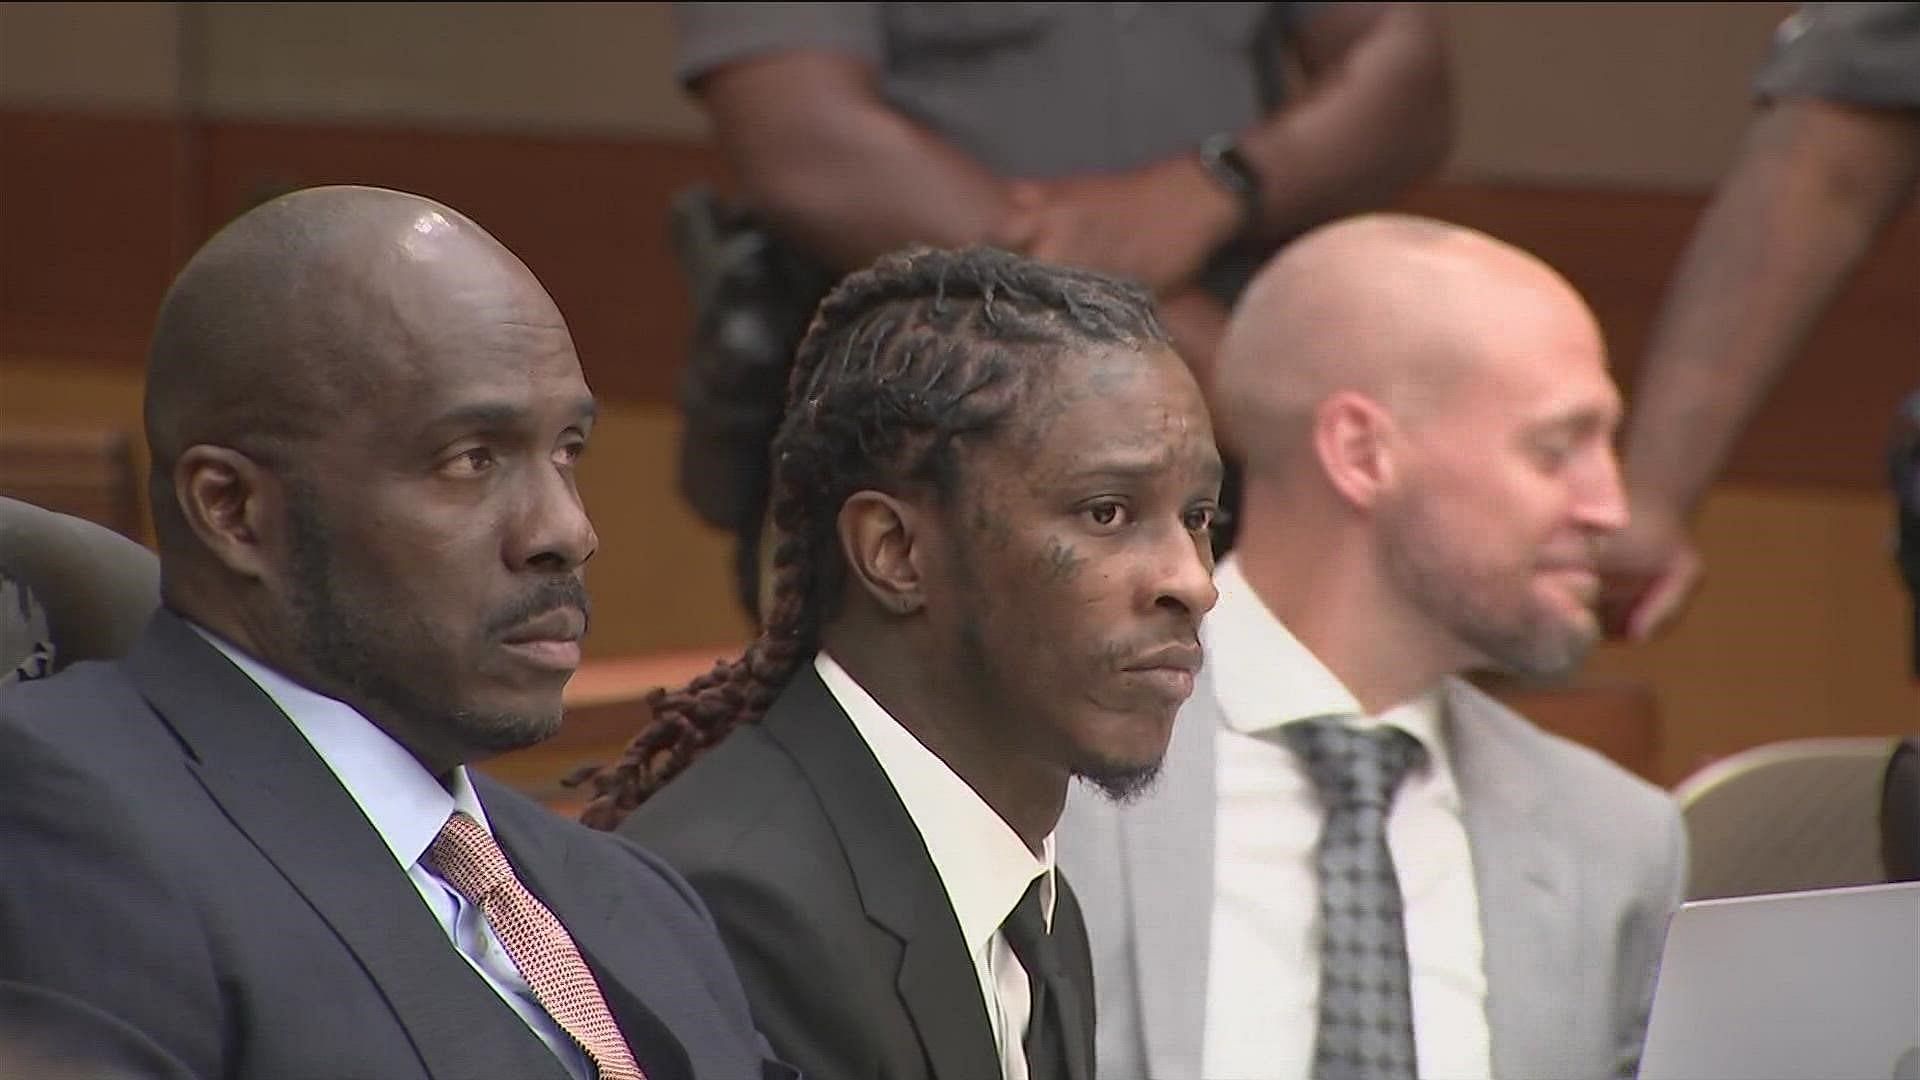 quot Now this is some evidence quot : Young Thug court hearing video goes viral